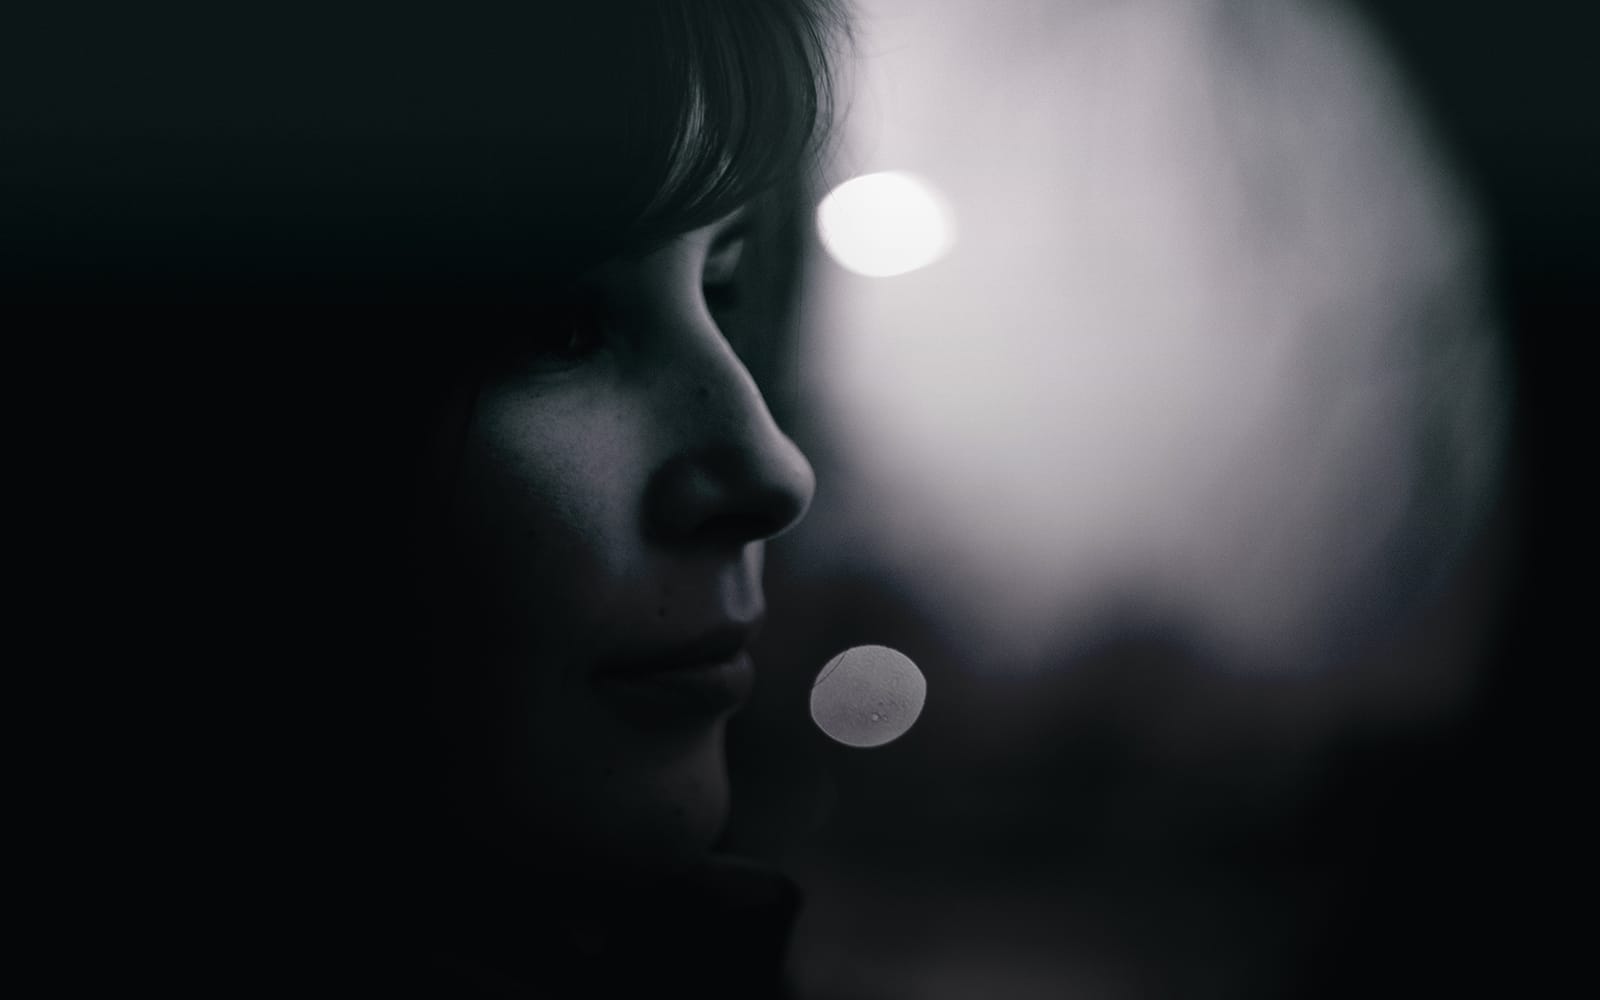 Shadowy profile of a woman's face